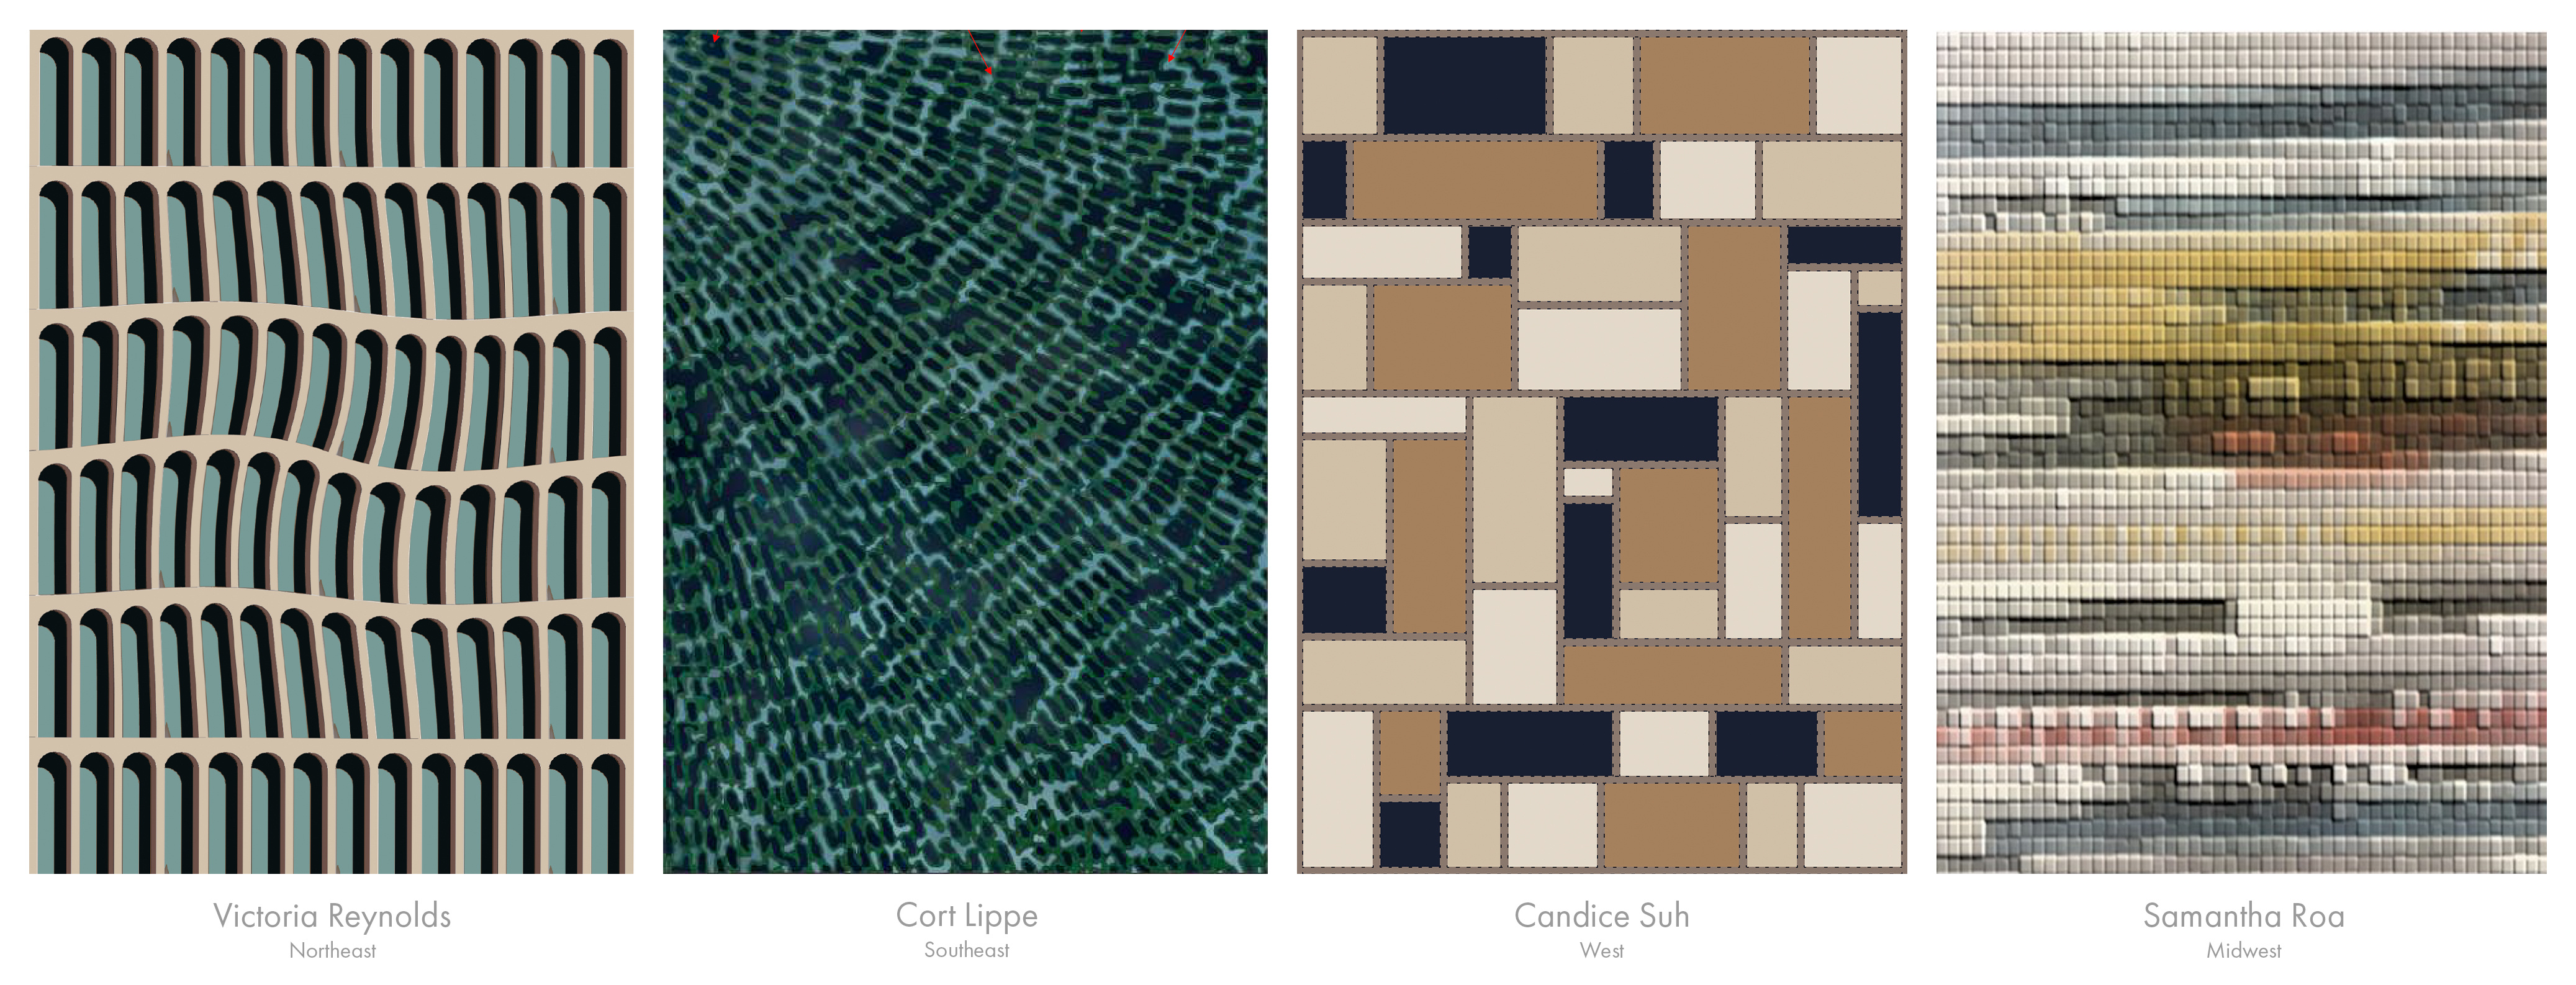 4th-Annual-Rug-Design-Contest-All-Winners